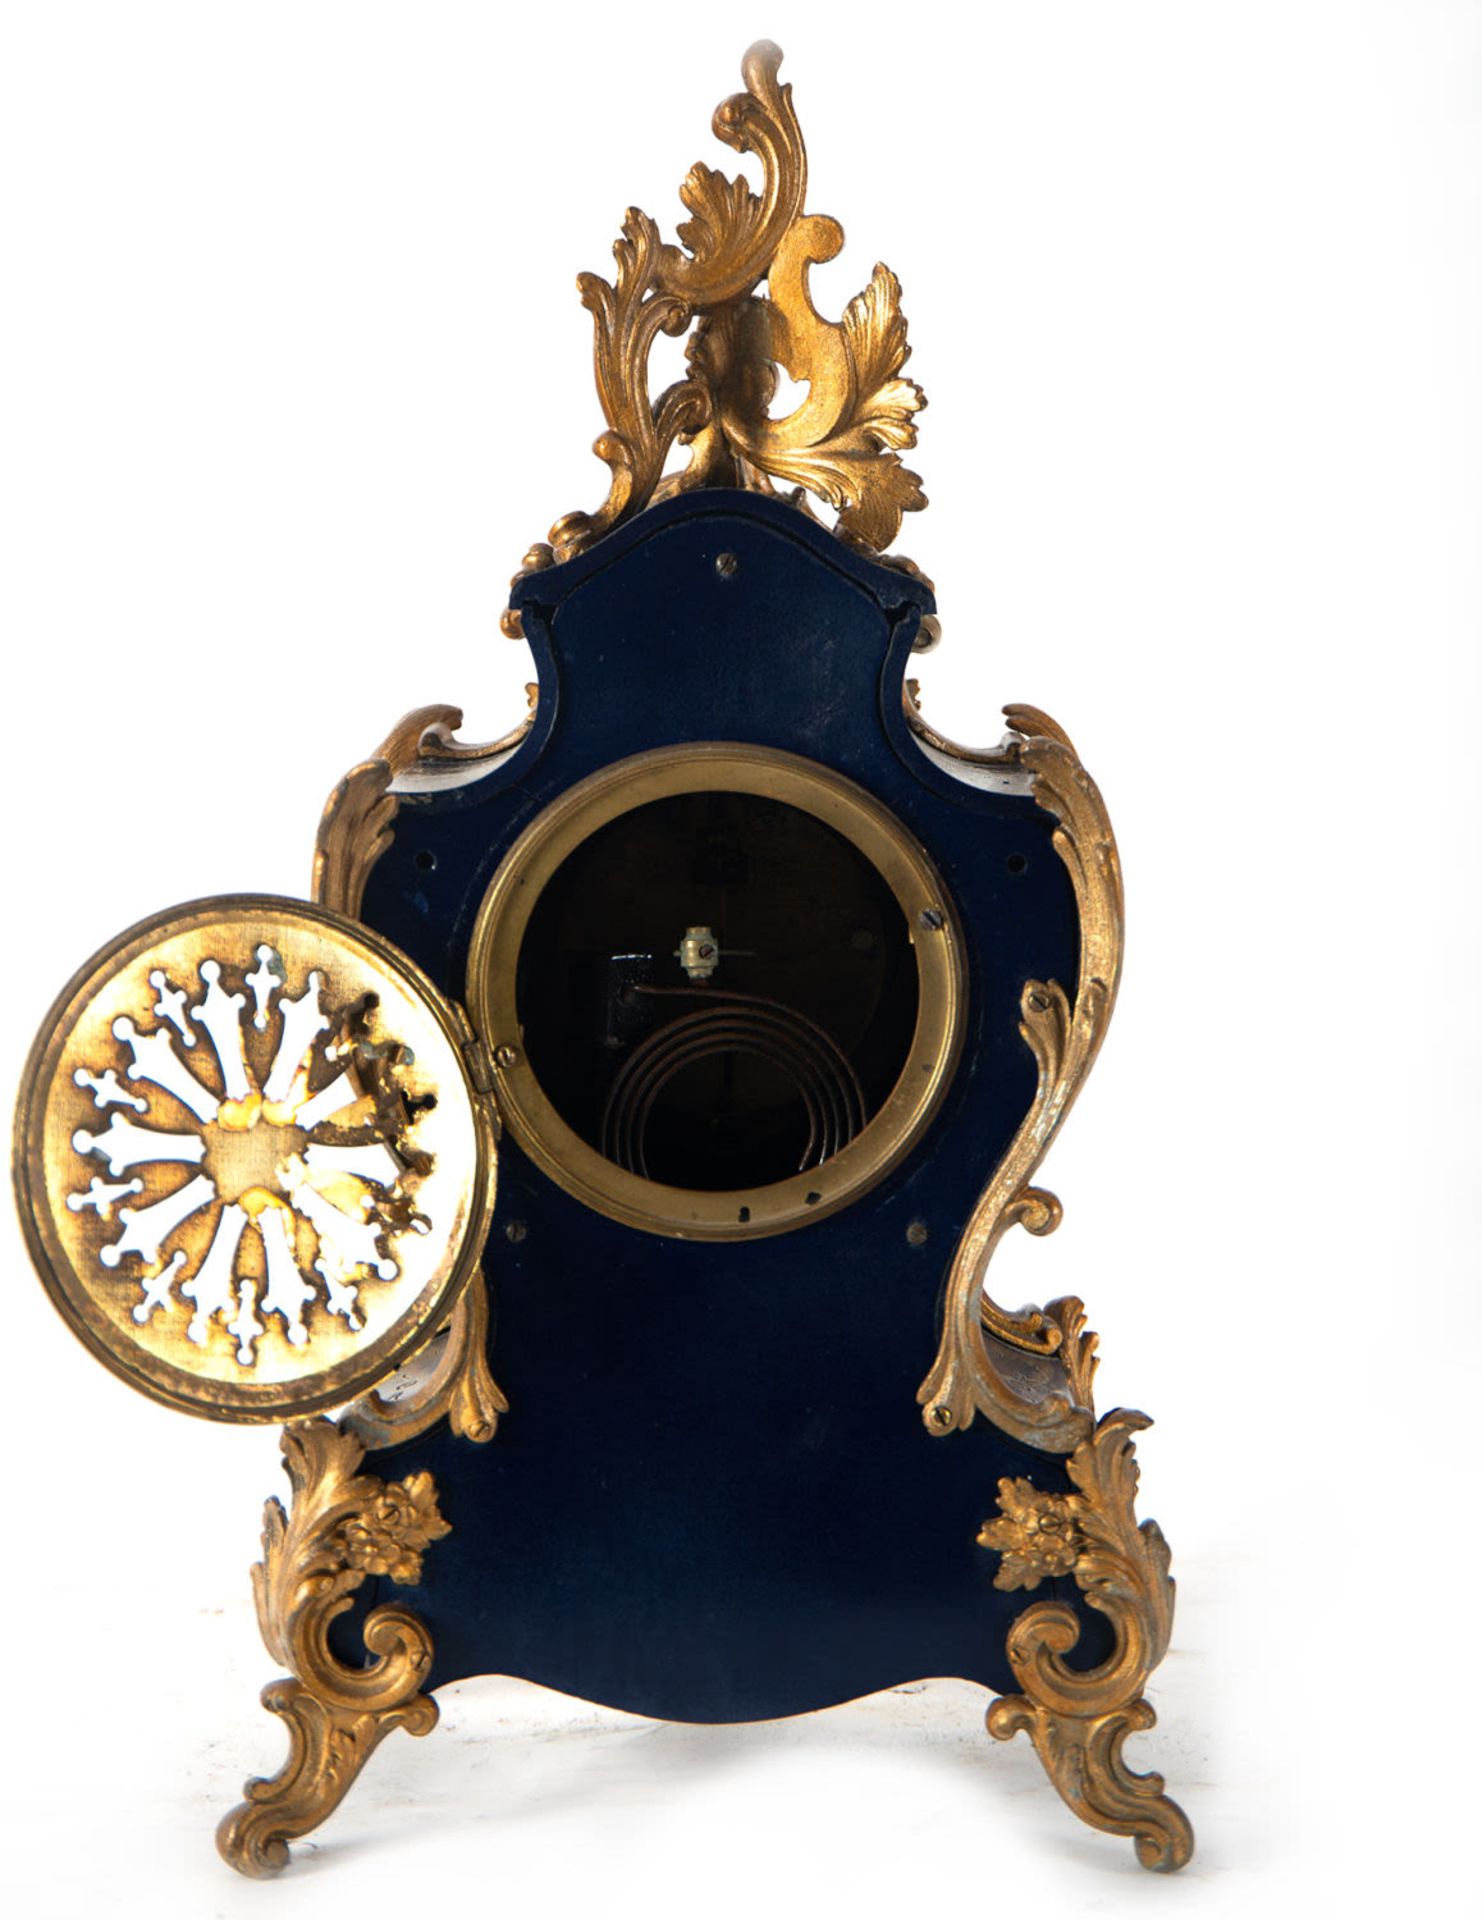 Louis XV style clock in gilt bronze and enamels, 19th century - Image 5 of 5